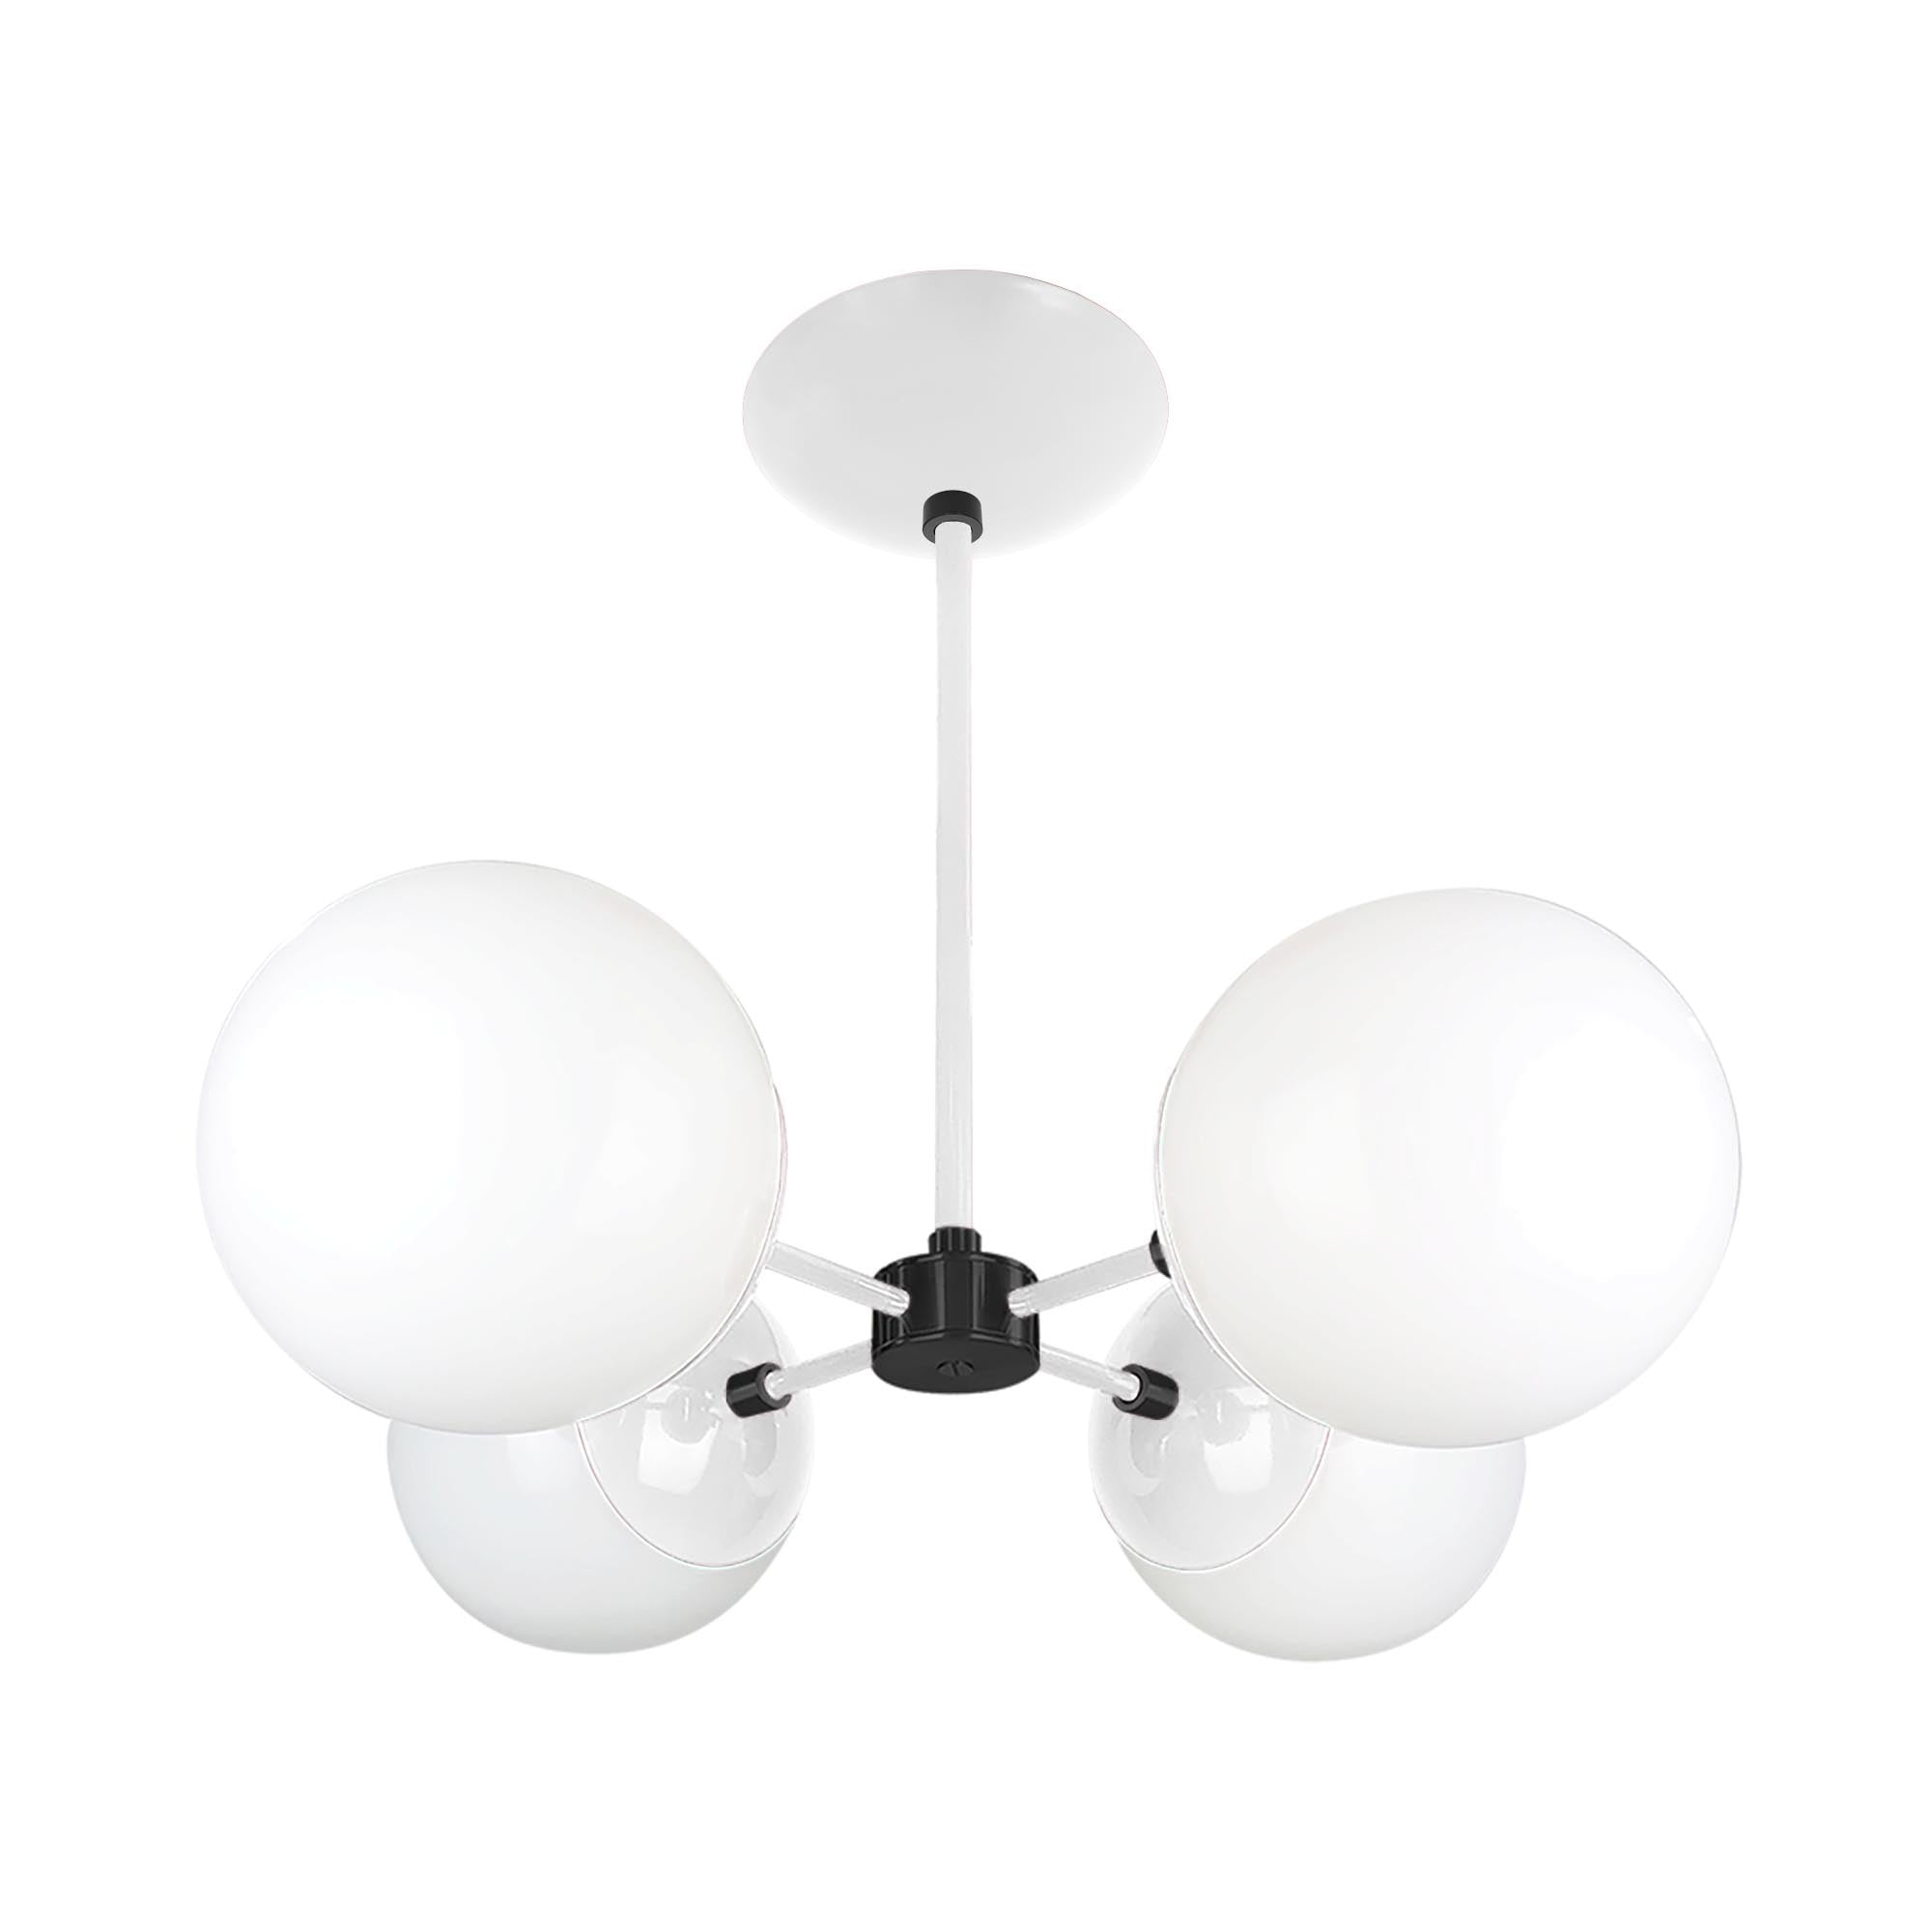 Black and white color Orbi chandelier Dutton Brown lighting